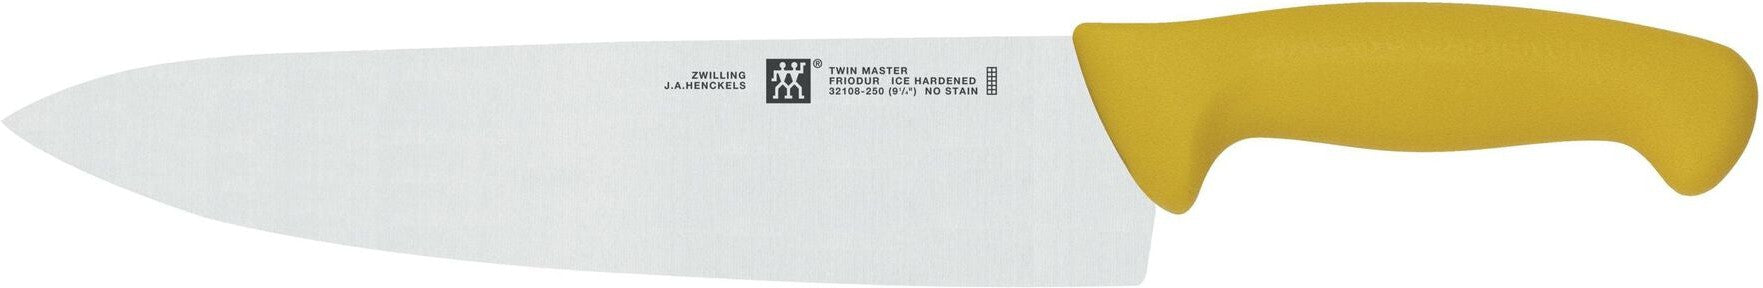 Zwilling - Twin Master 10" Stainless Steel Chef Knife - 32108-250